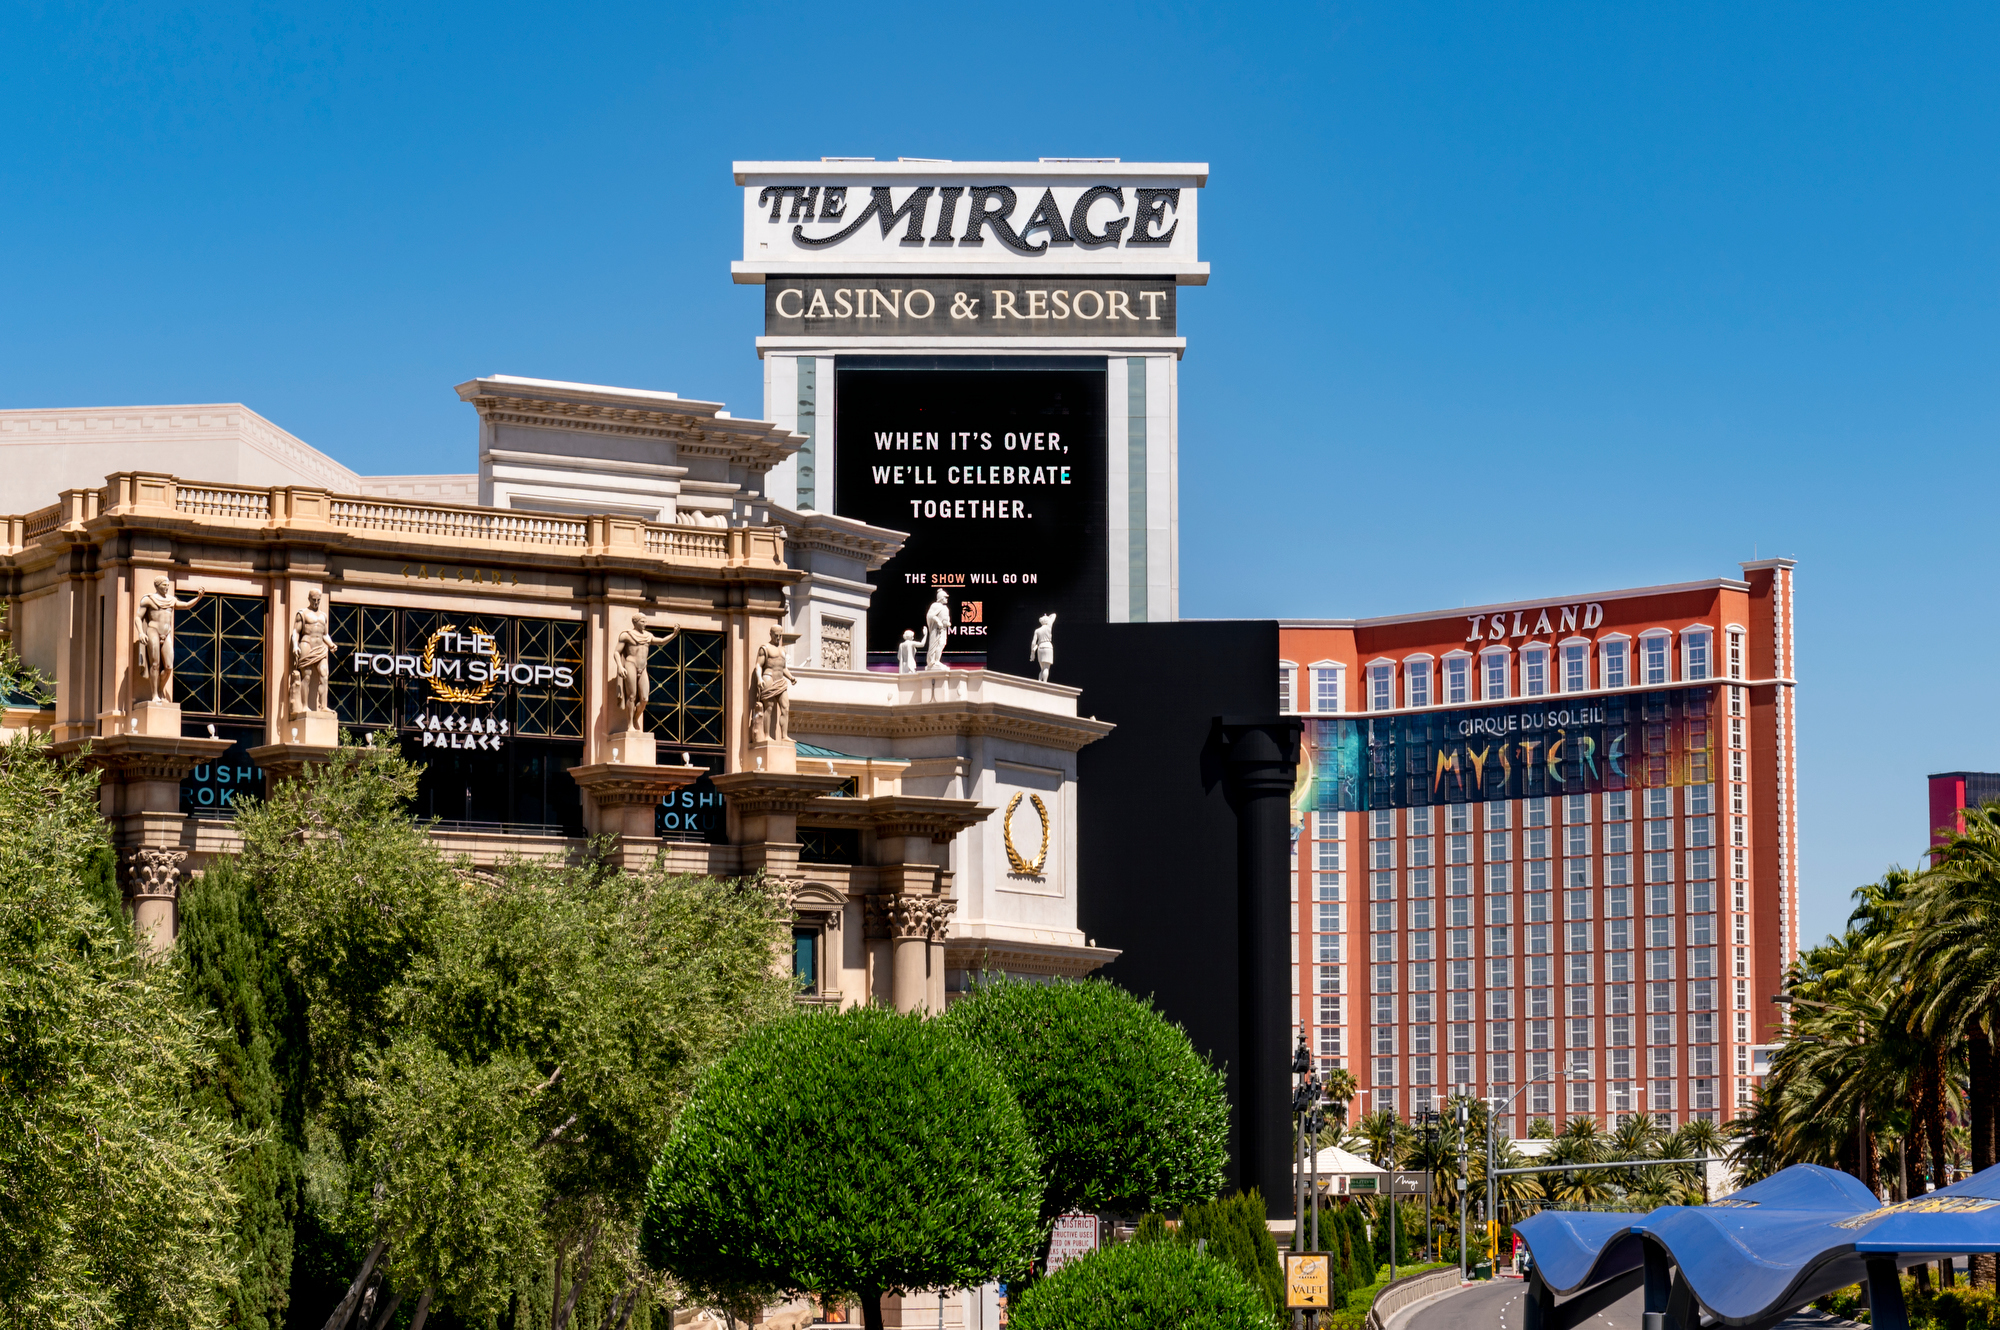 The Mirage marquee in April 2020.